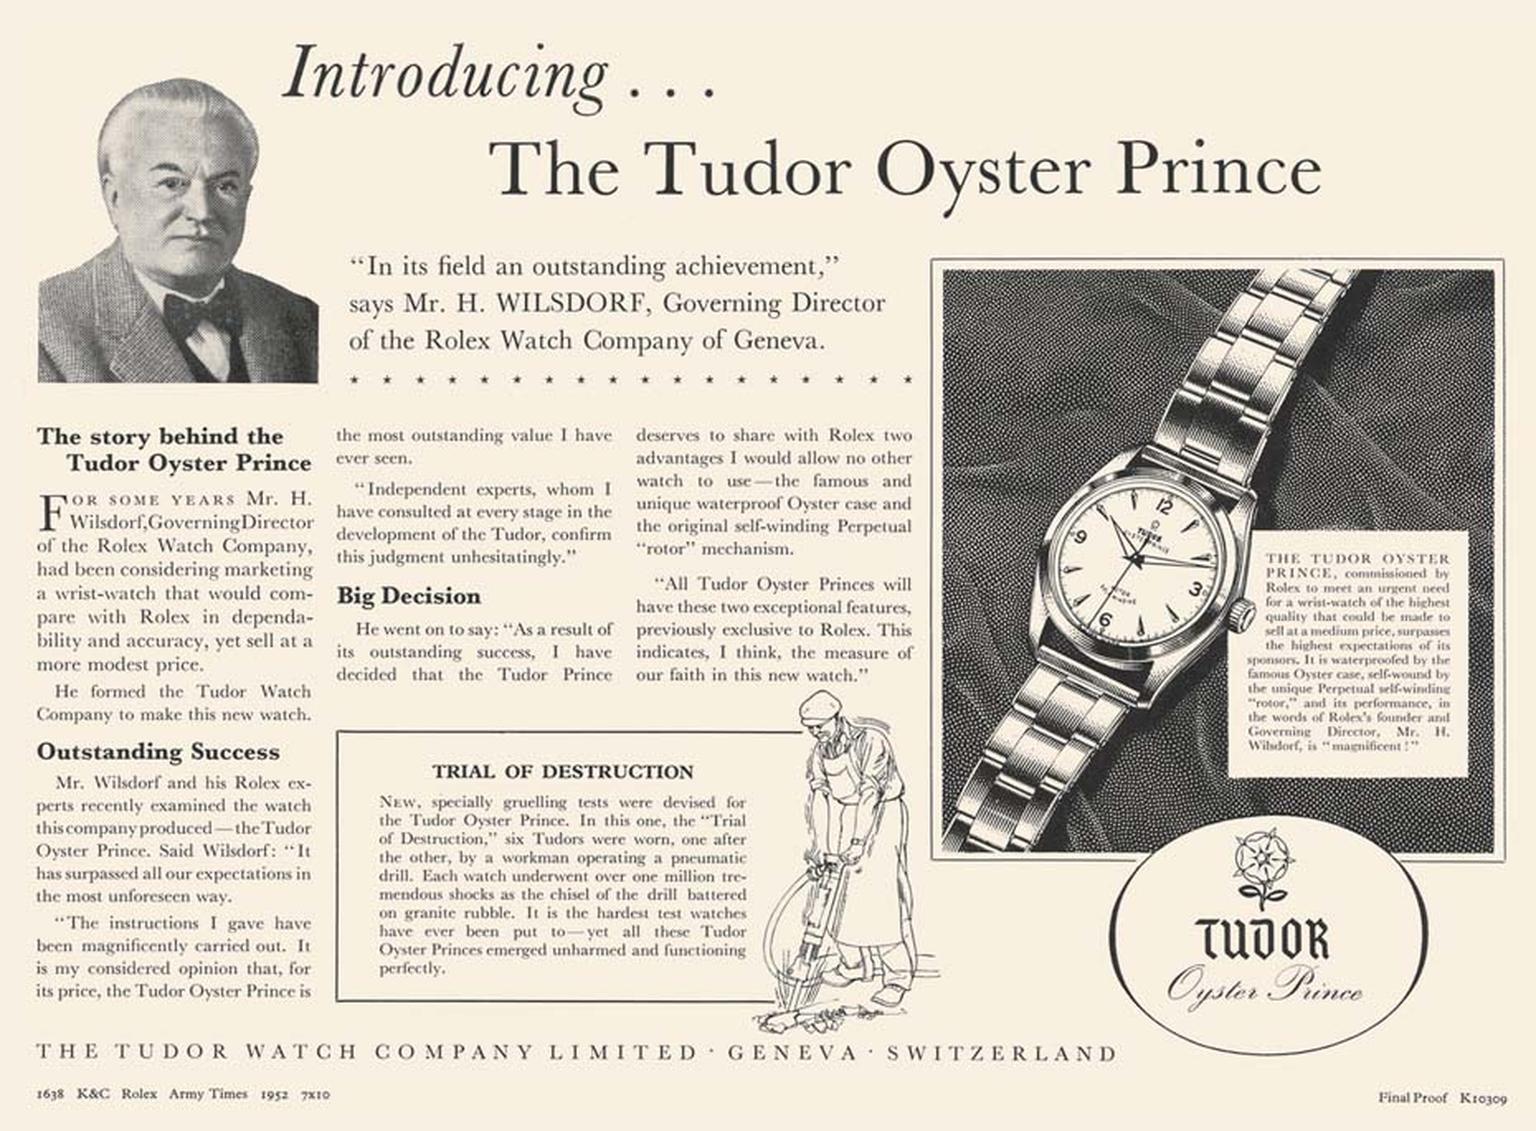 Rolex, launched Tudor watches 